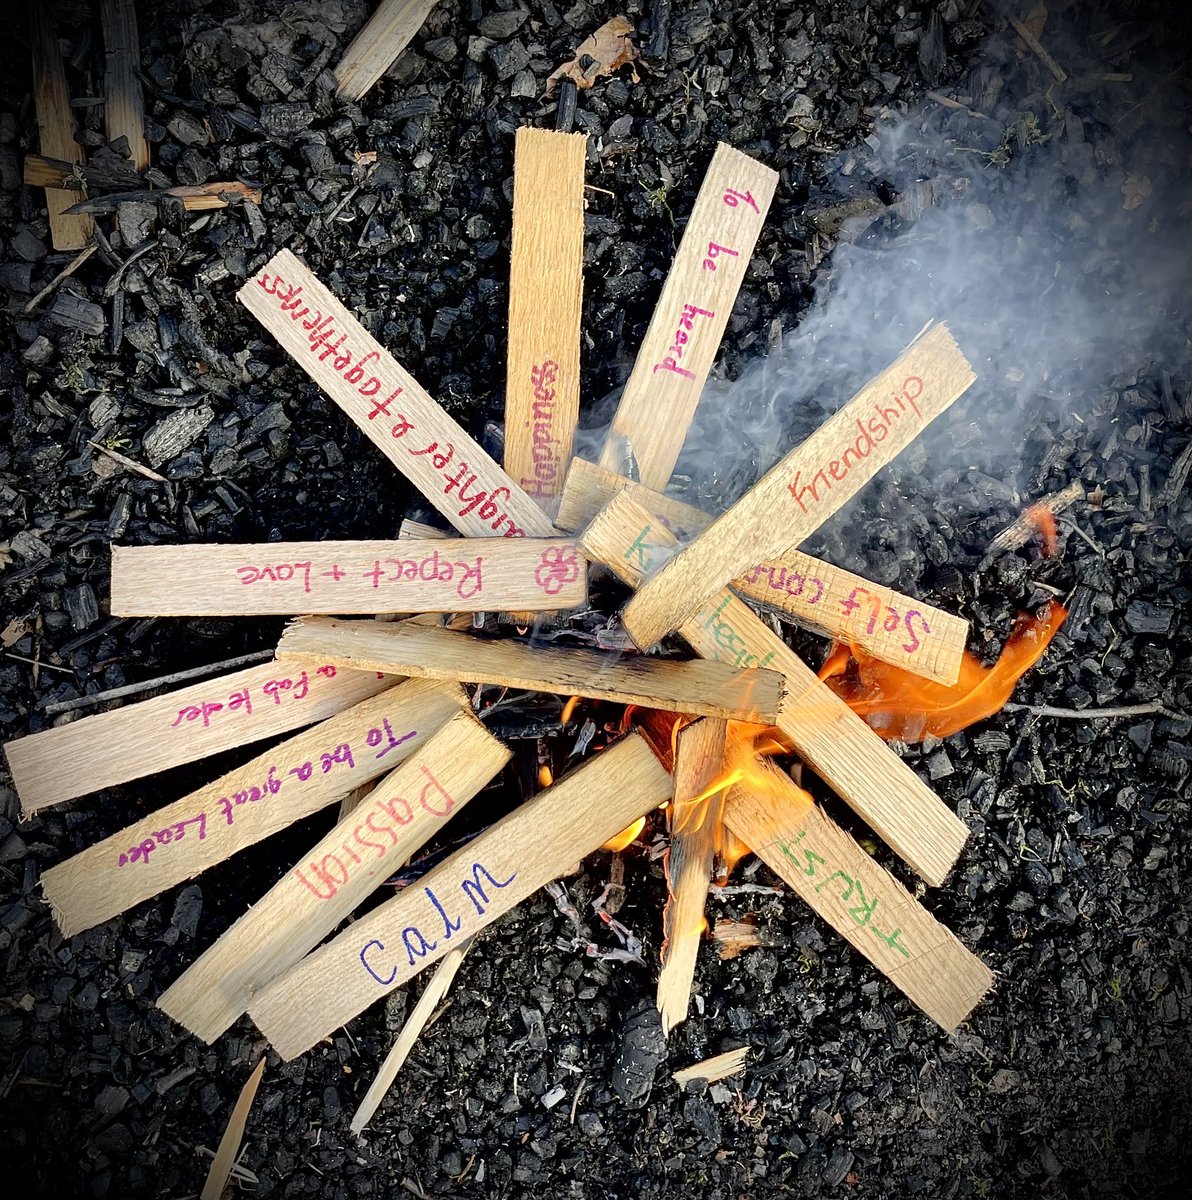 Introducing new Forest School Trainees to the ‘children’s fire’ and helping them understand the importance of community locating our needs as we form a new tribe!